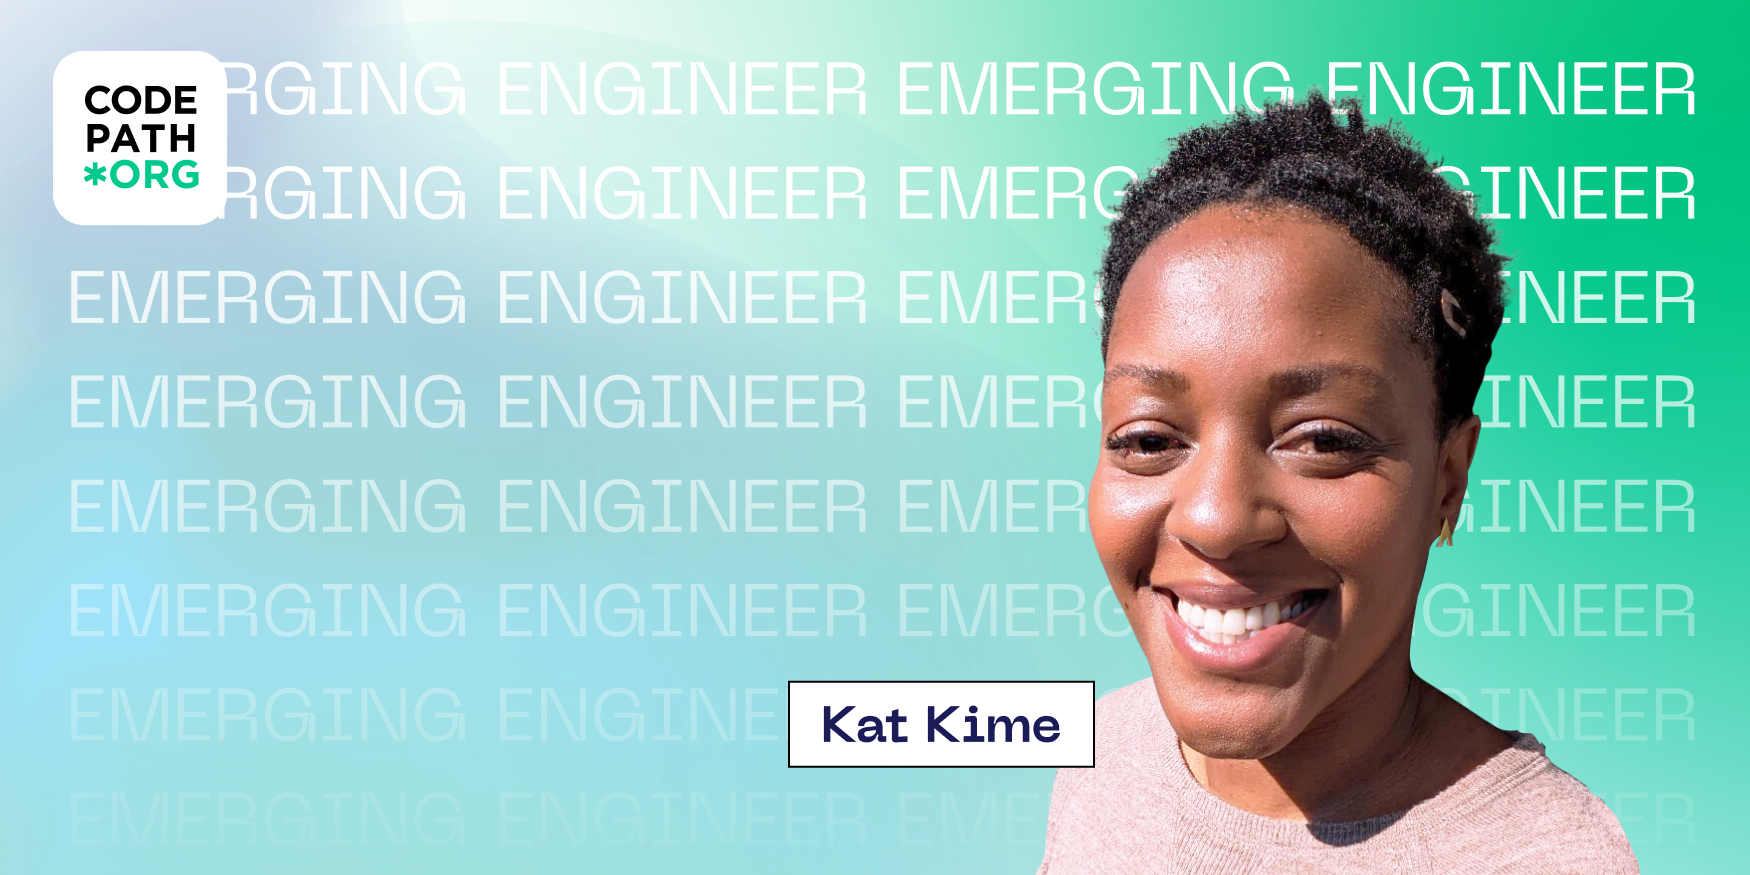 How Kat Kime Landed Tech Internships Offers from Intuit, PlayStation, and LinkedIn